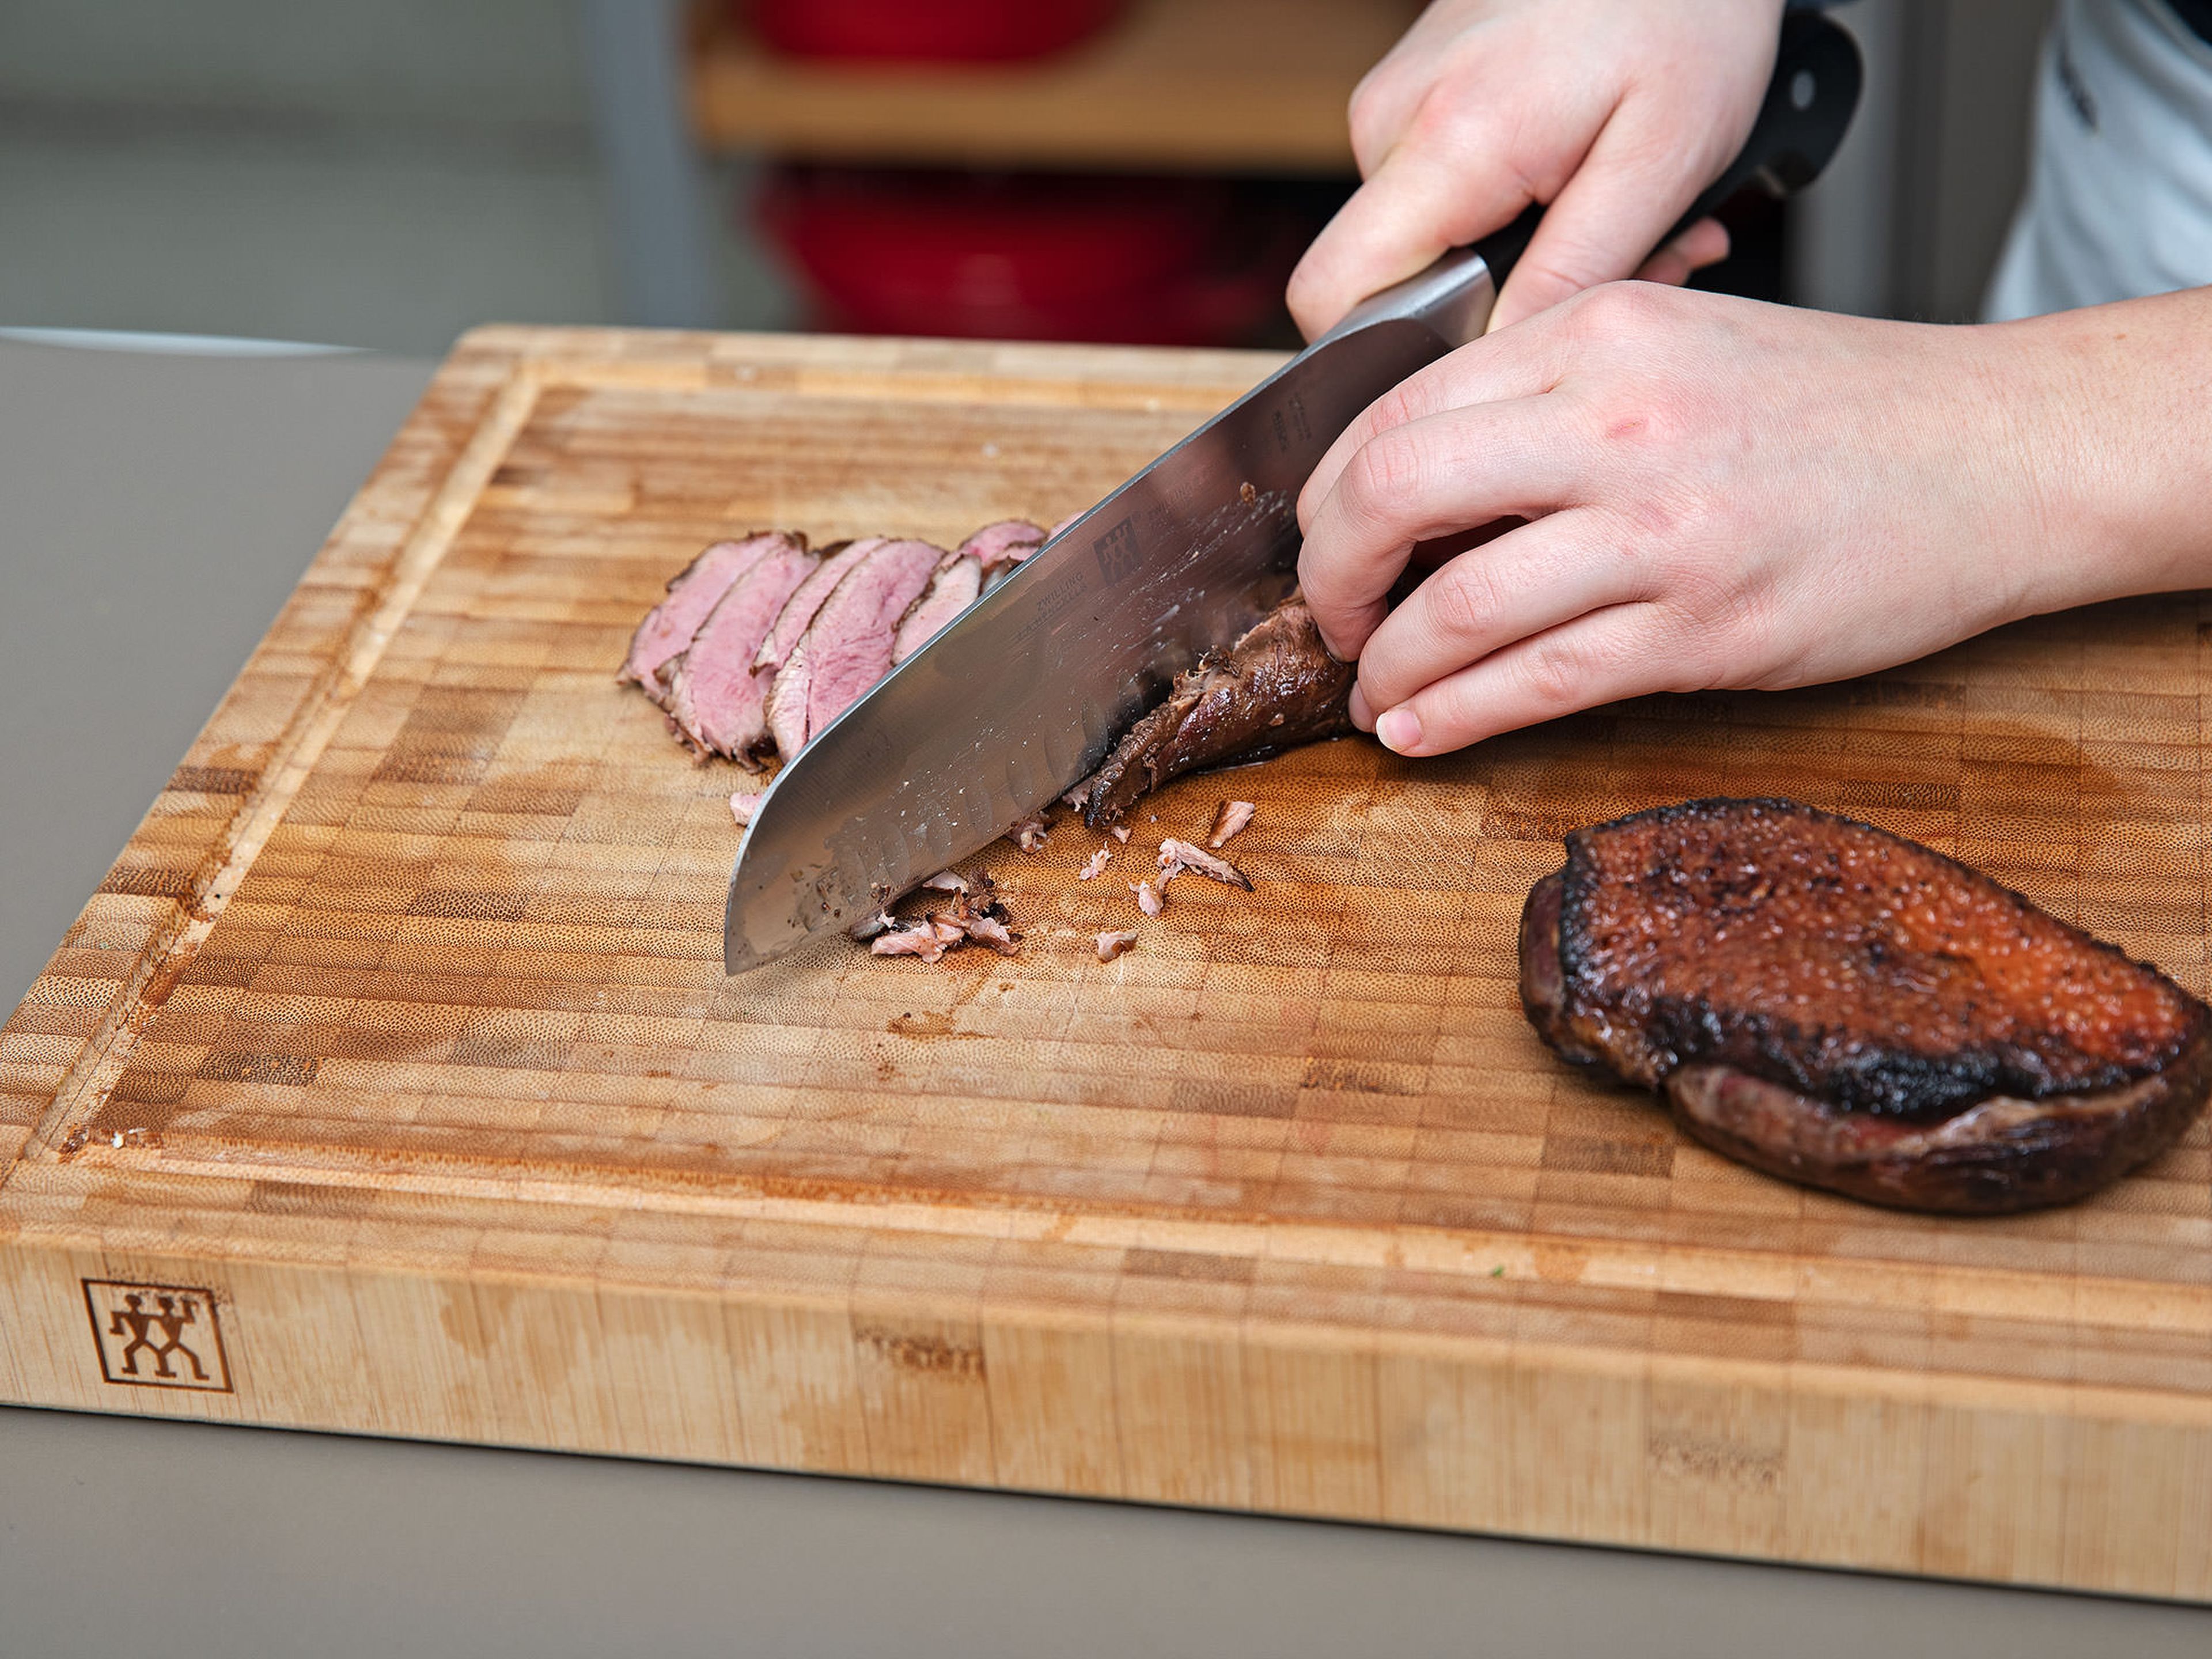 Turn up the oven to 230°C/450°F and roast duck breasts for  approx. 5 – 7 min., or until the skin gets really crispy. Remove from the oven and thinly slice.